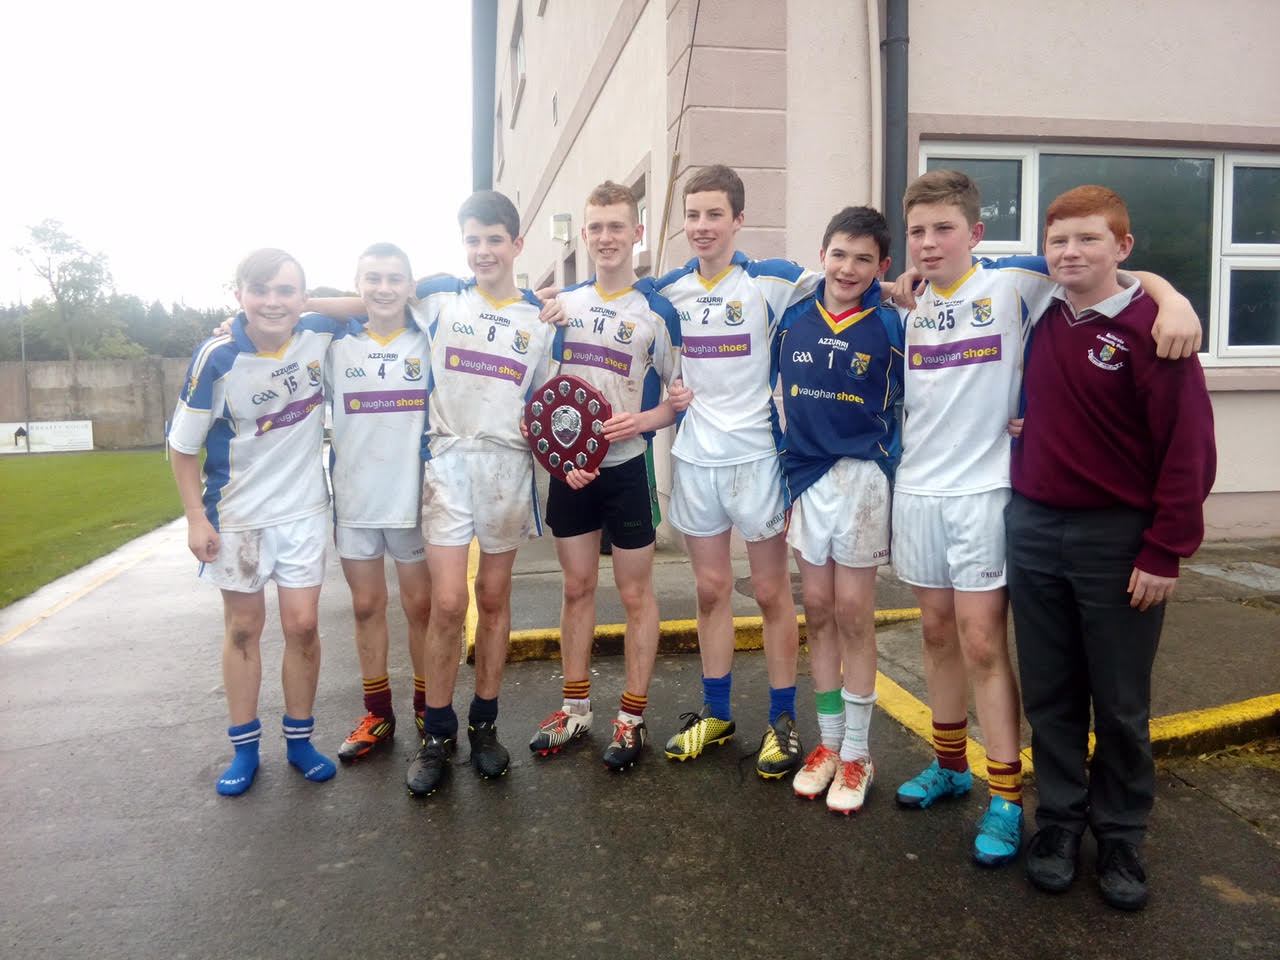 Ballinrobe club members who figured on the Ballinrobe Community School team, winners of the Mayo Juvenile A football championship, 2016. (L to r): Adam, Jason Butler, Eoghan Gilrane, Cian O'Connell, Conor Cusack, Luke Jennings, Conor O'Brien, Gary Mellett (supporter who also plays on various school and club teams). 